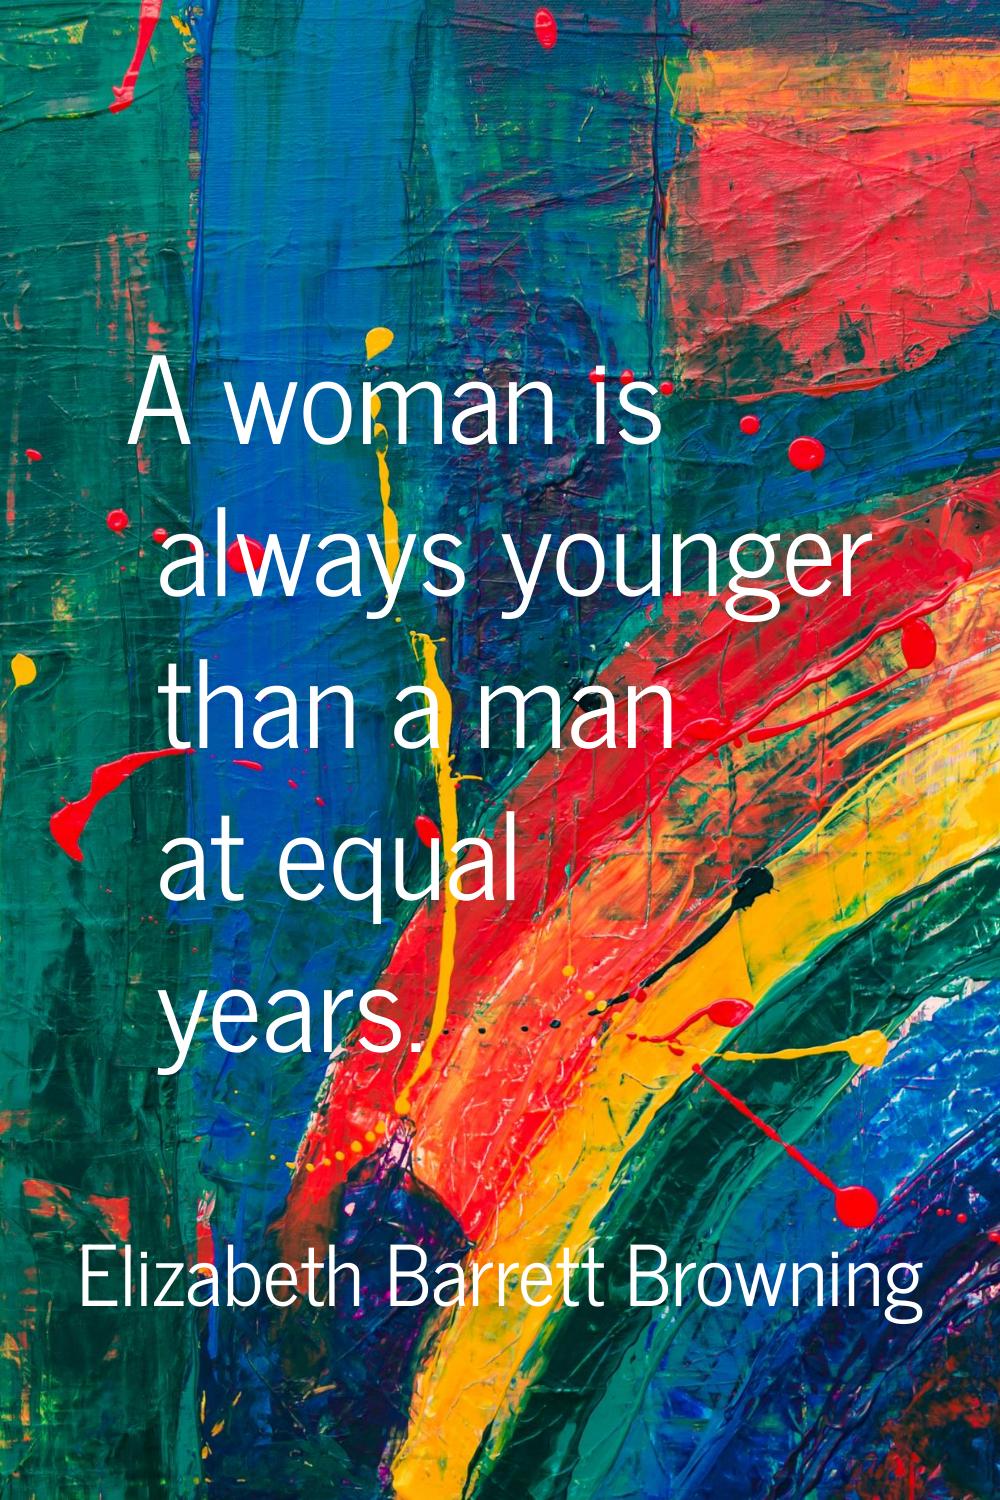 A woman is always younger than a man at equal years.